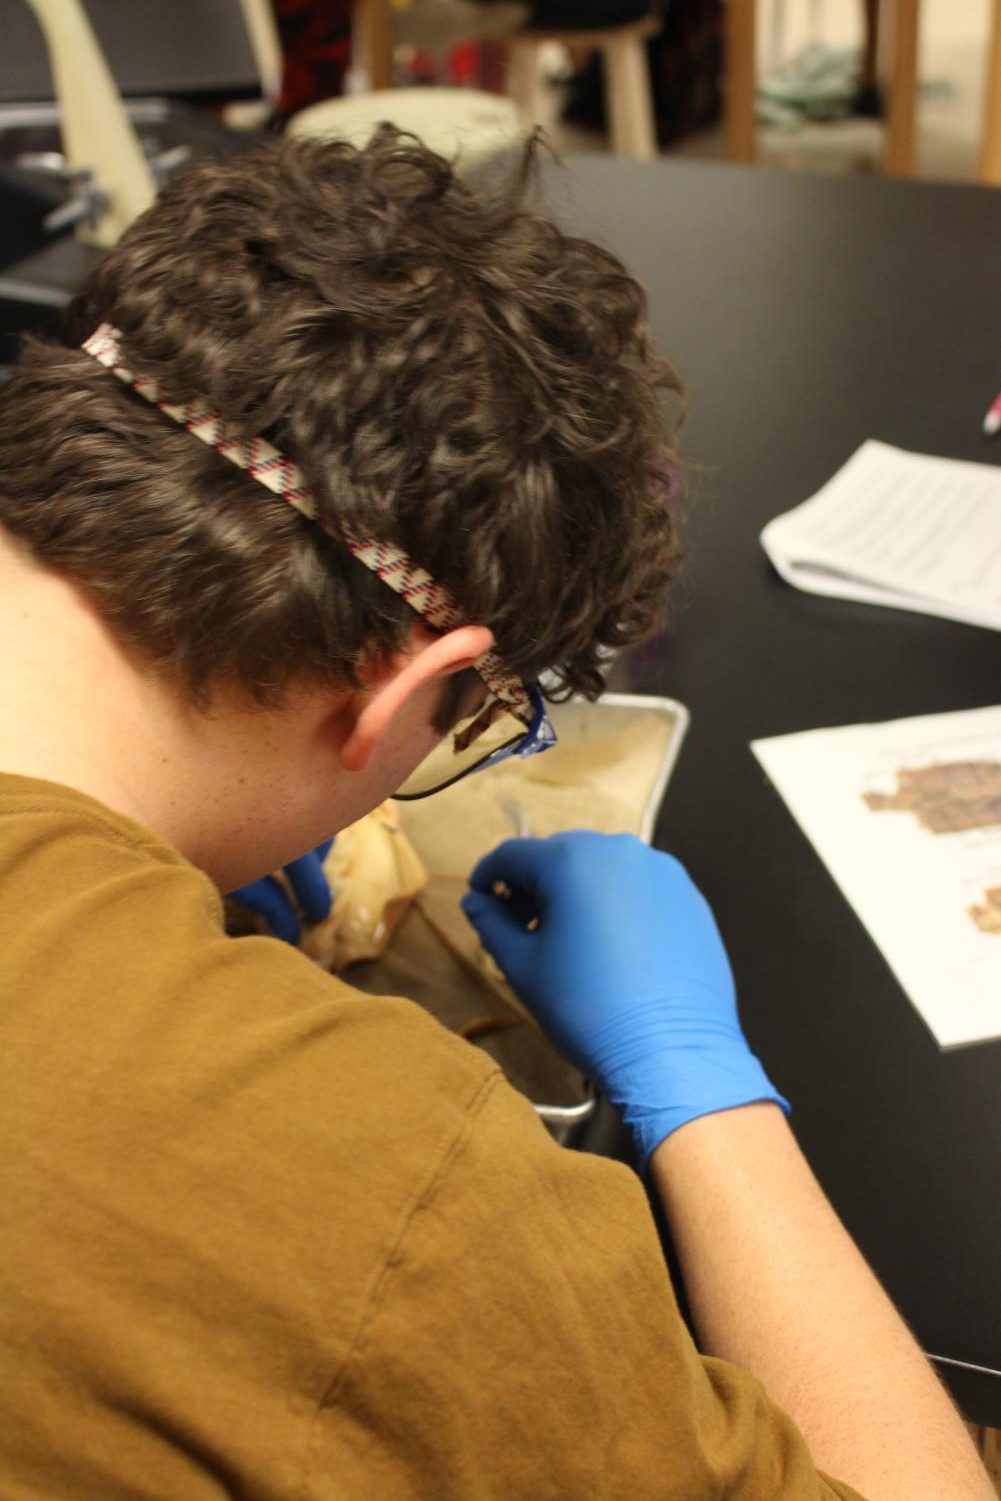 Zoology+dissects+squids+%28Photos+by+Shaye+Comes%29